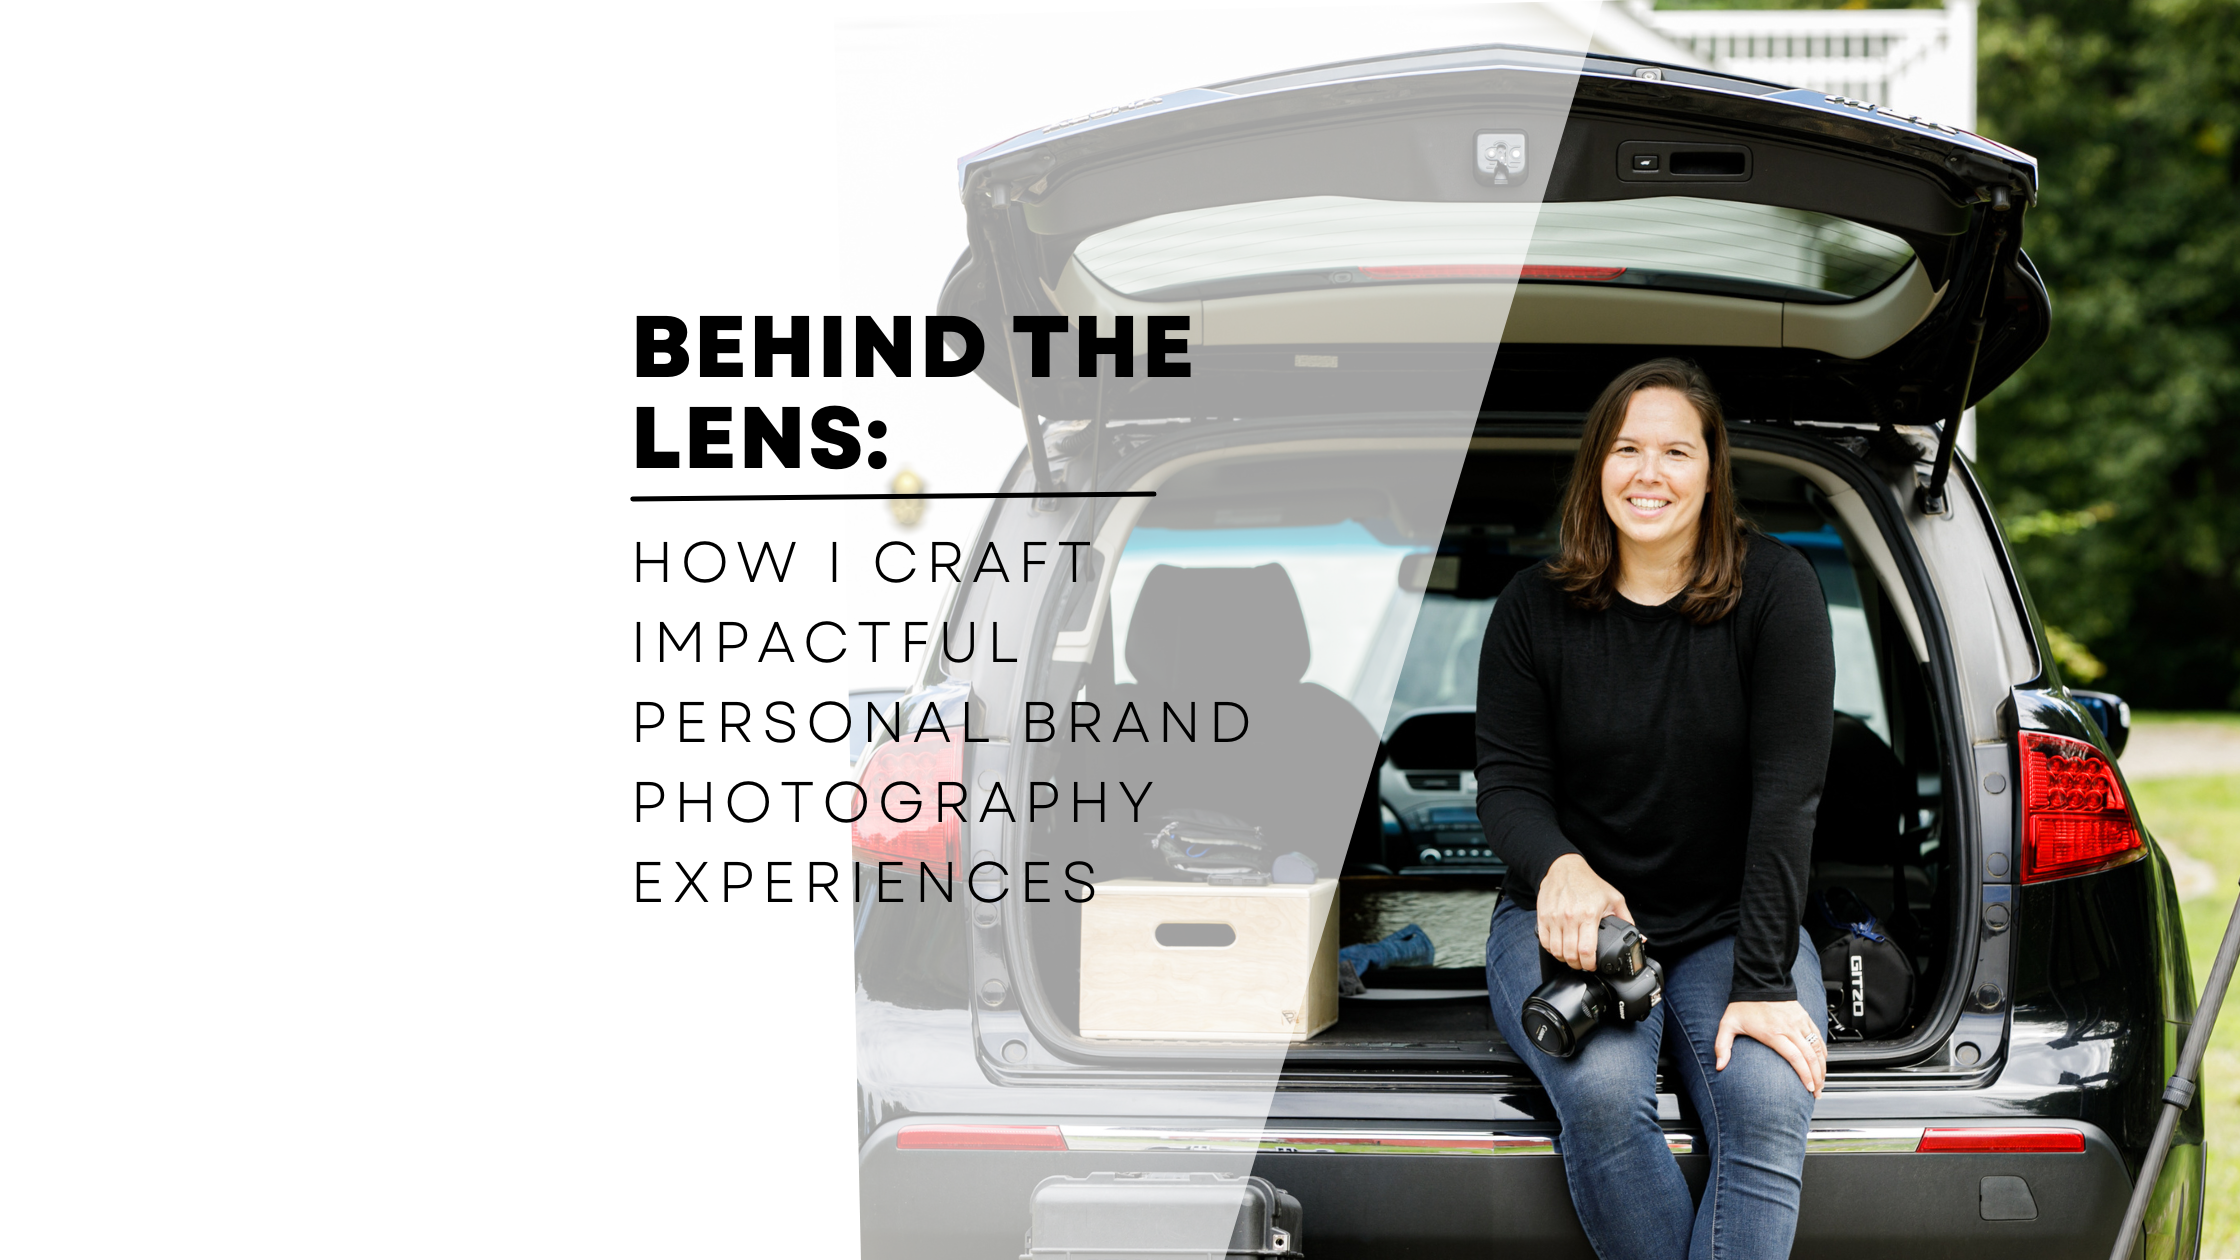 behind the lens_ how I craft impactful personal brand photography experiences_nicole Bedard photo video